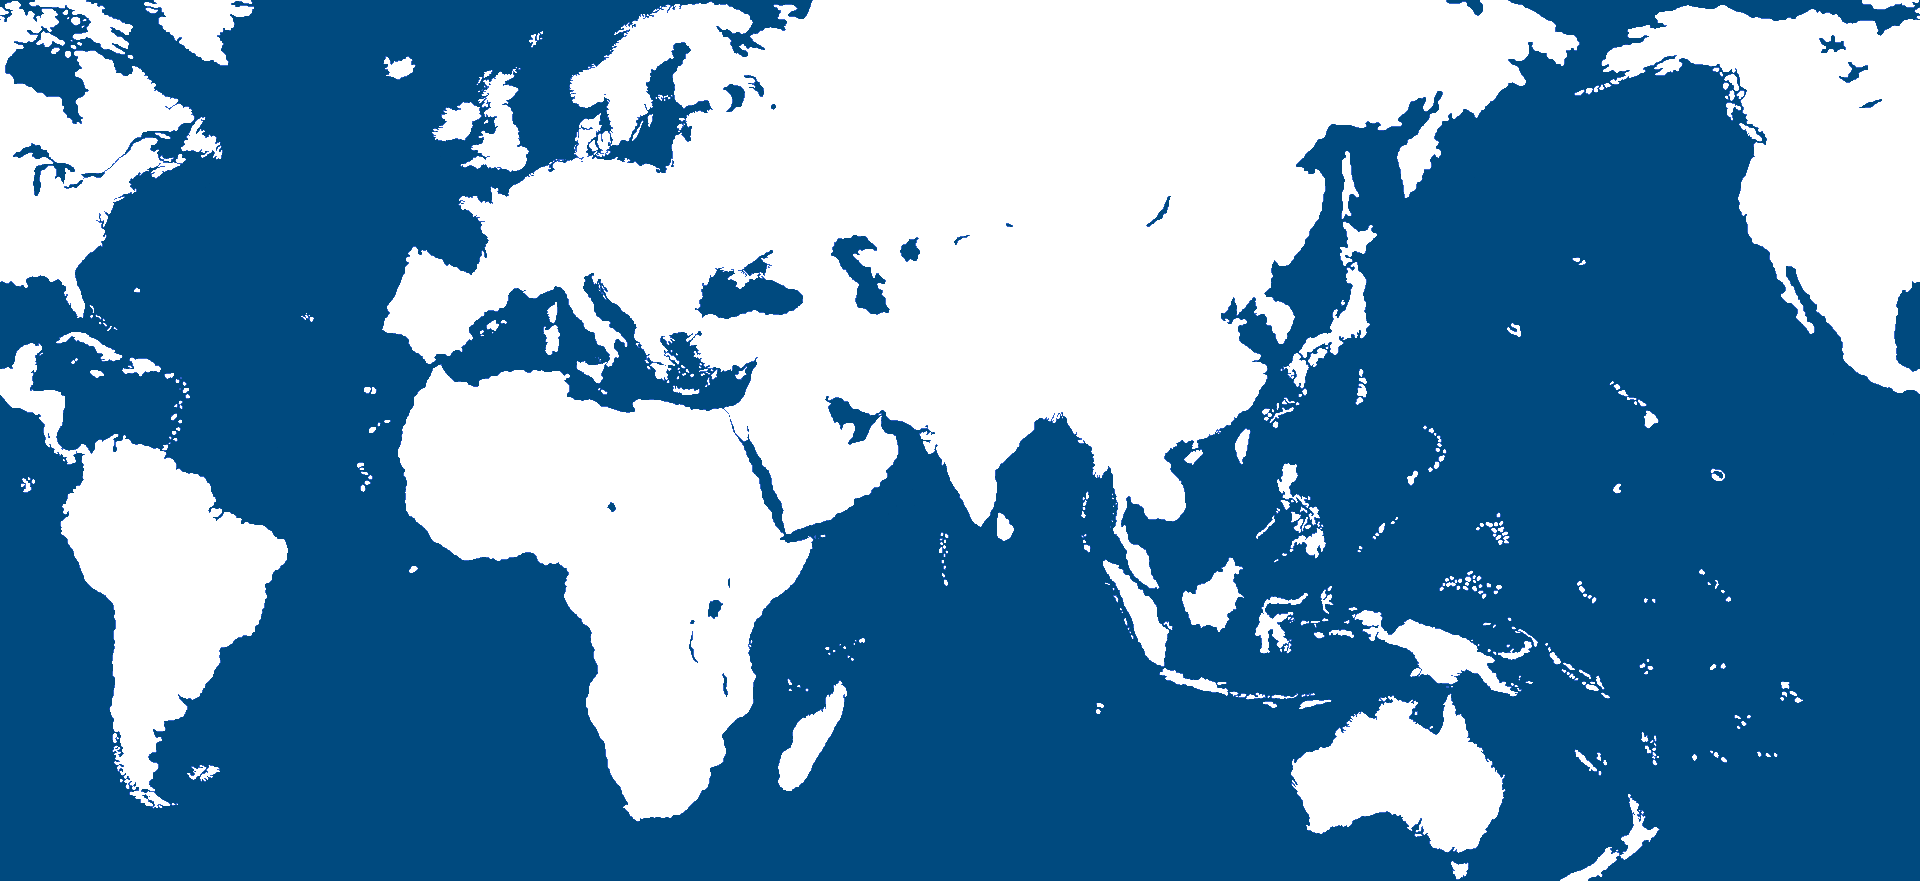 triplea_world_projection_elk_and_hepps1920x881.png